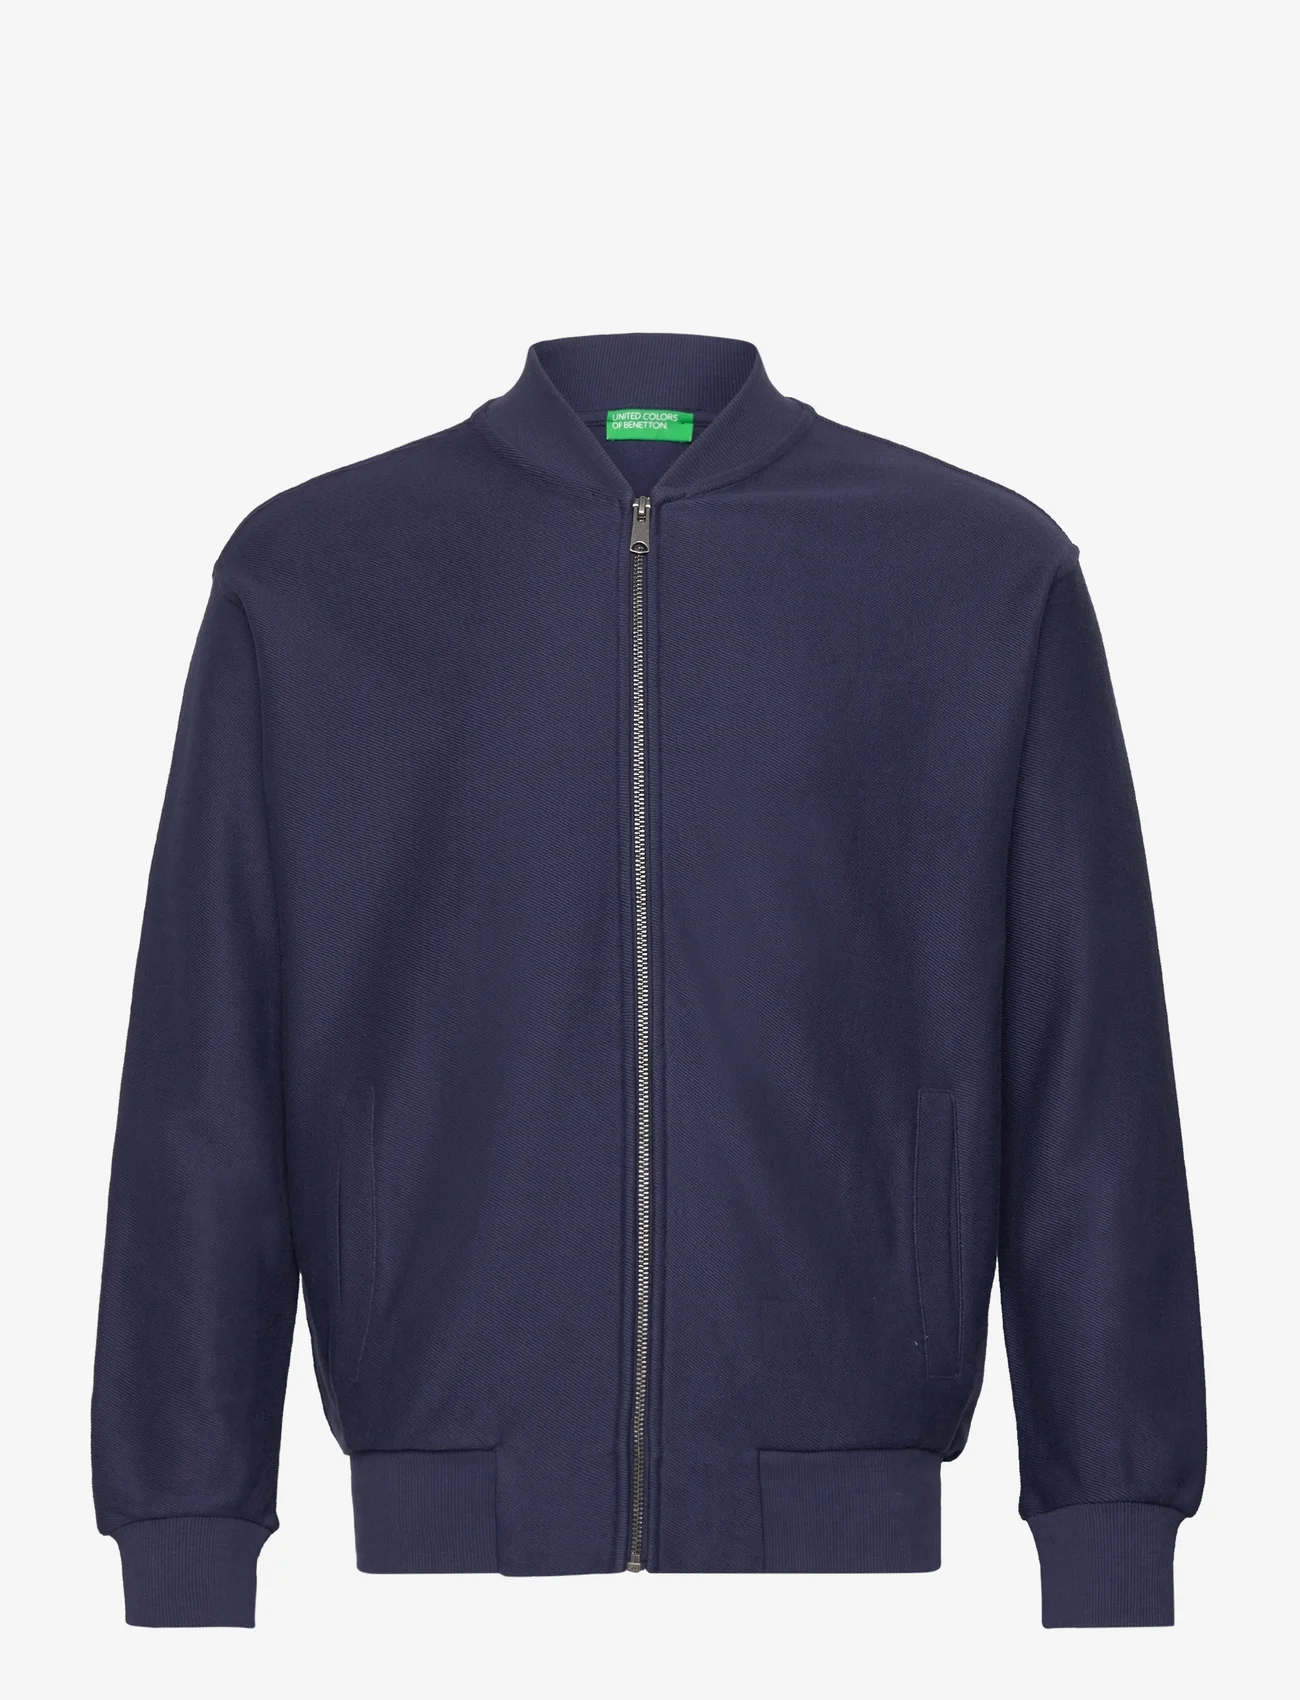 United Colors of Benetton - JACKET - spring jackets - night blue - 0